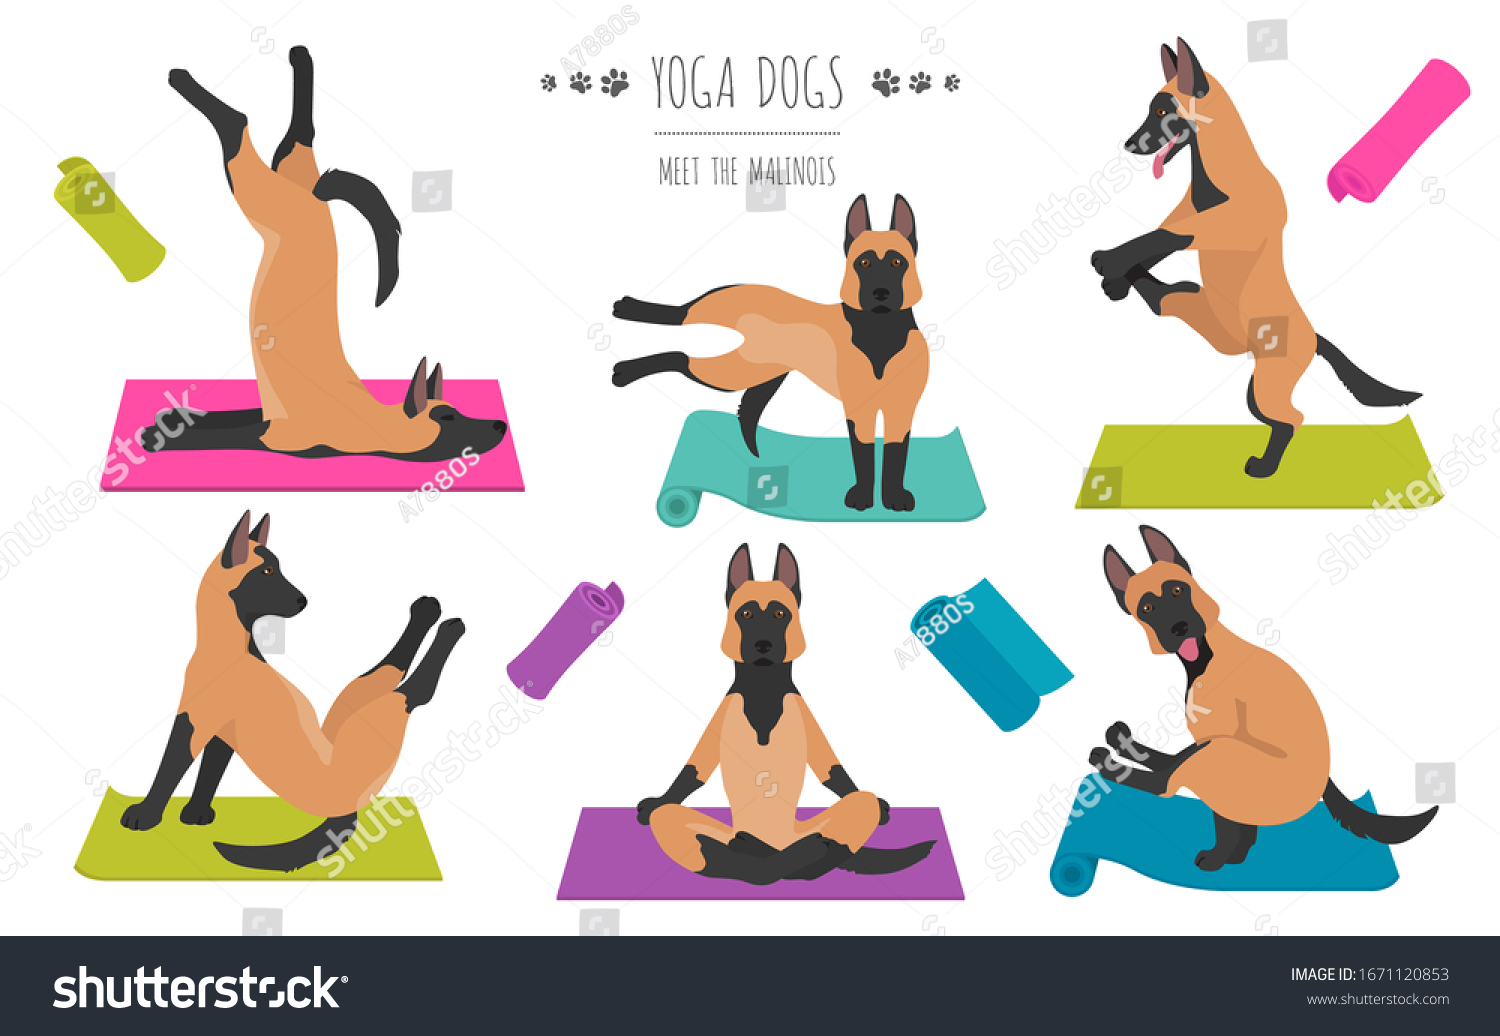 SVG of Yoga dogs poses and exercises poster design. Belgian malinois clipart. Vector illustration svg